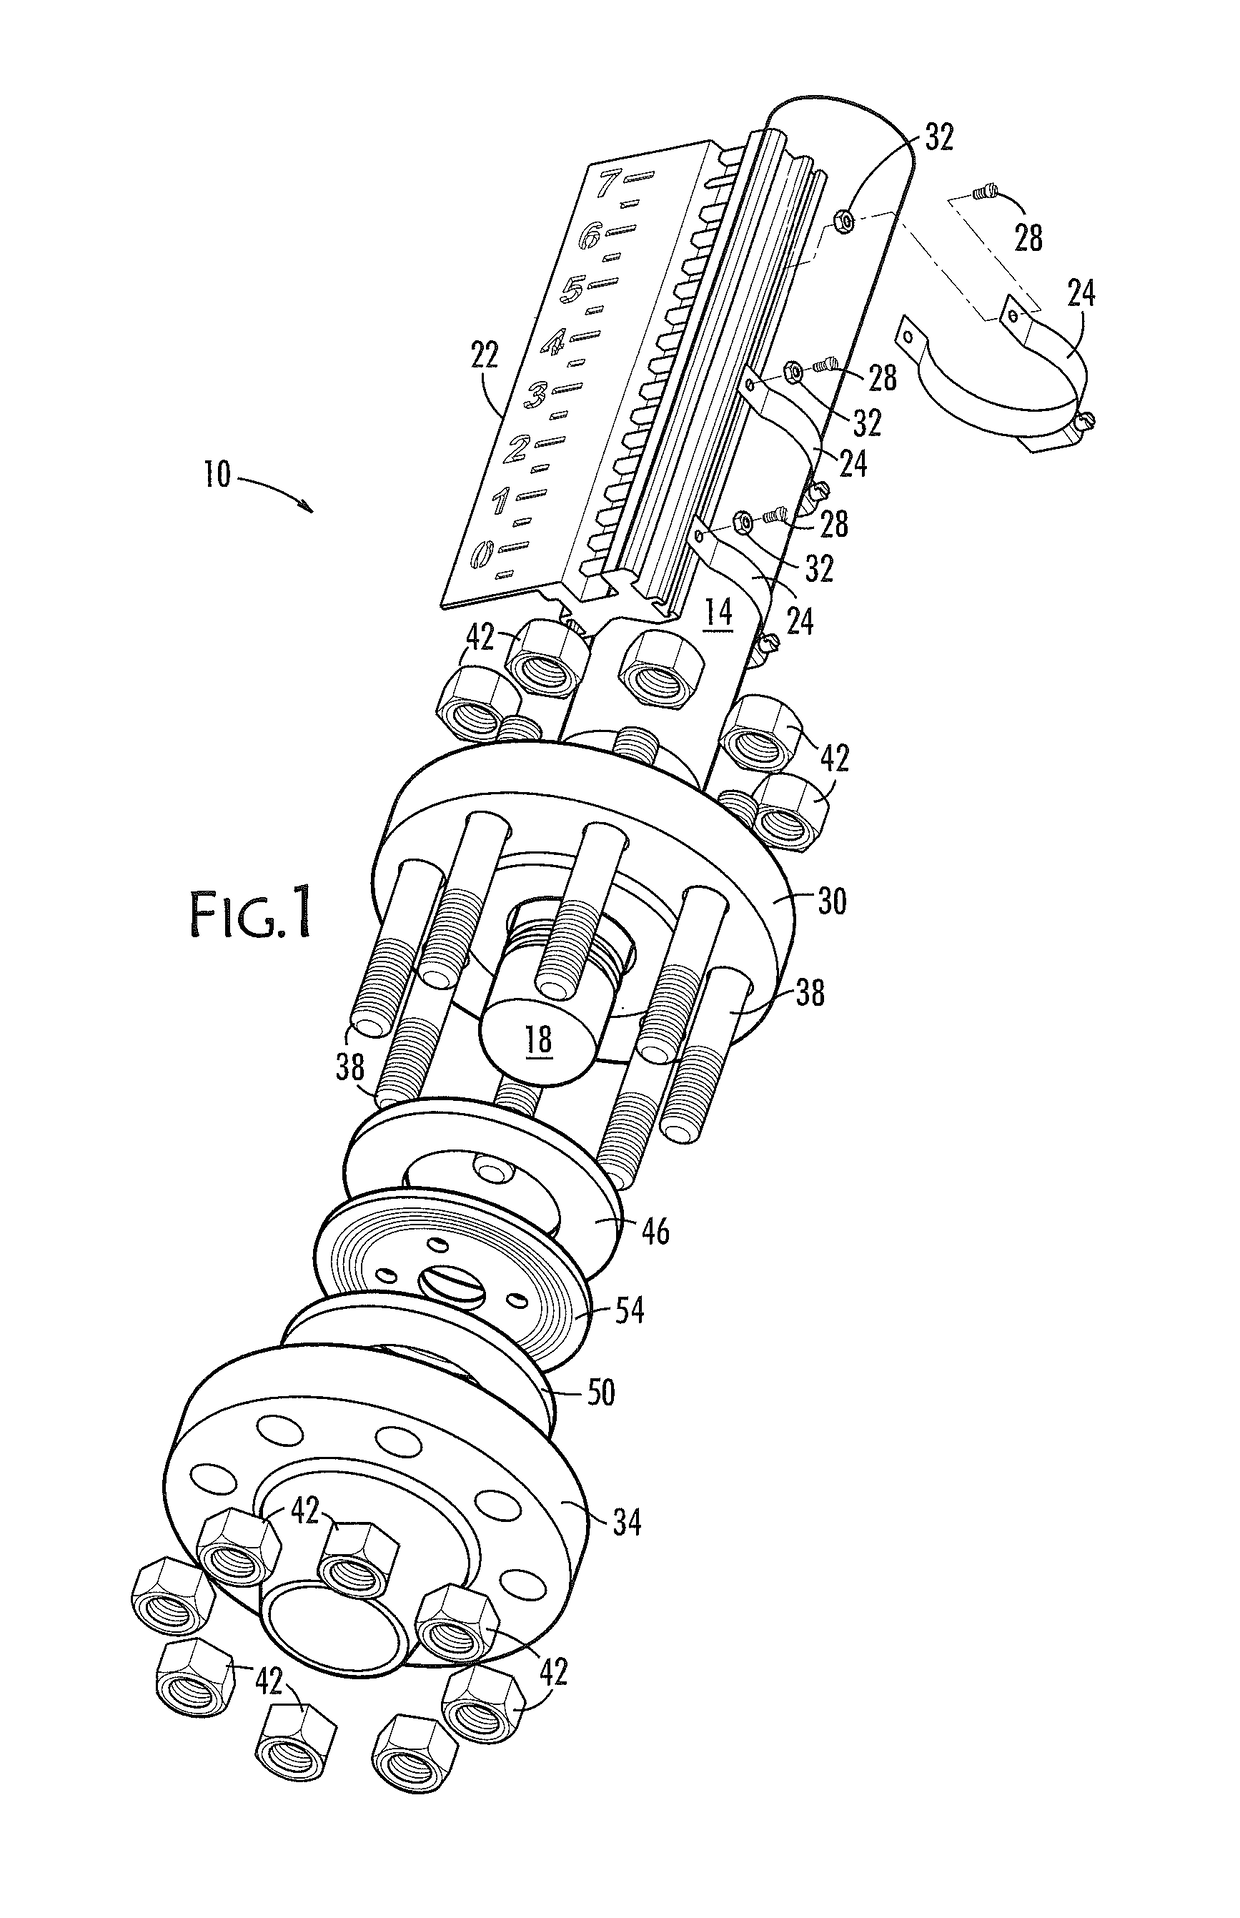 Nuclear grade air accumulating, isolating, indicating and venting device